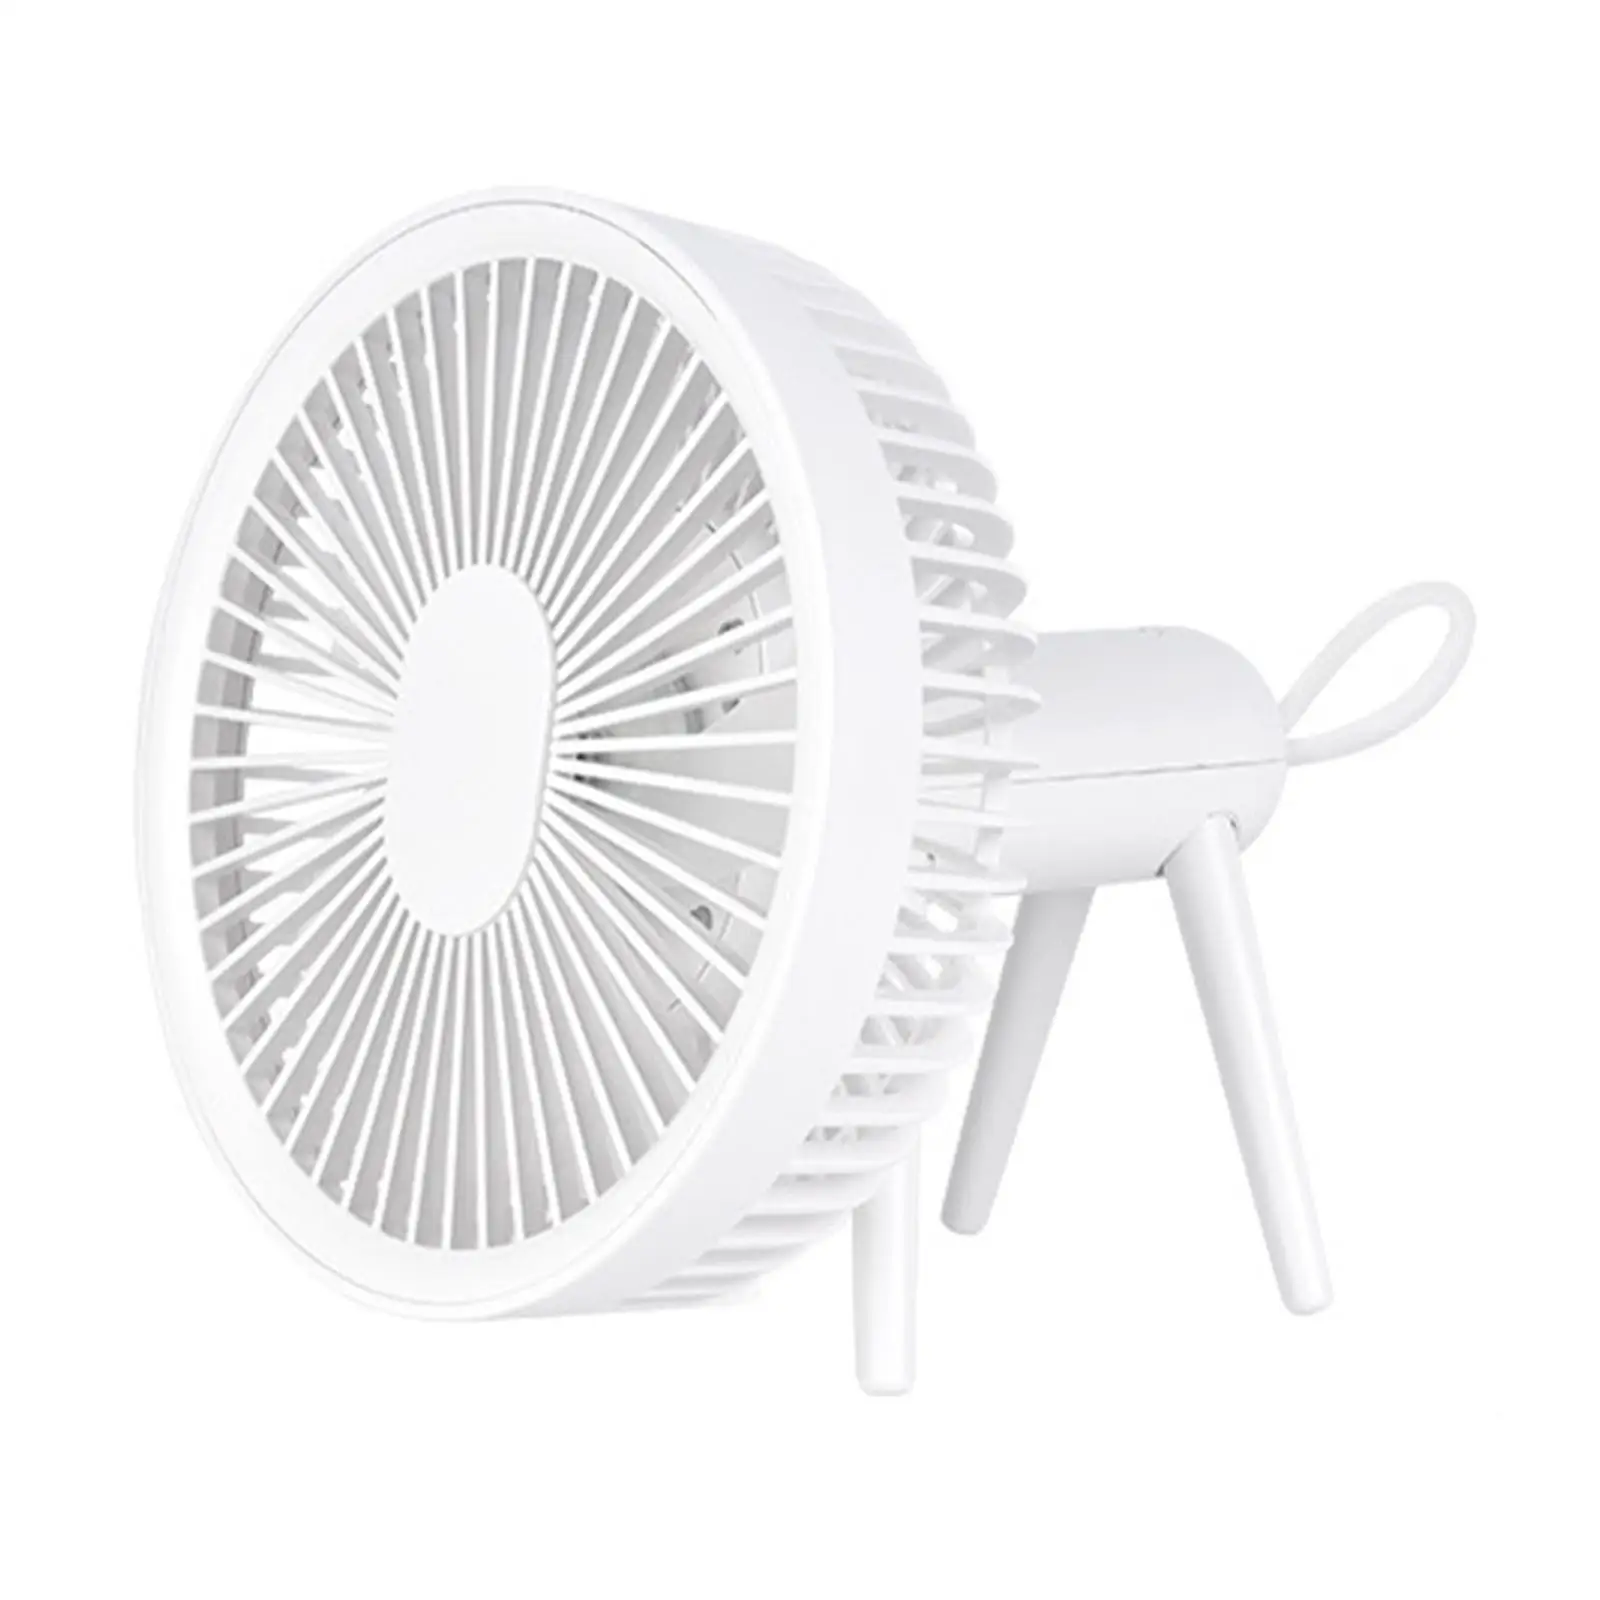 USB Desk Fans Air Cool Fan 4 Speeds Personal Table Cooling Fan for Backpacking Car